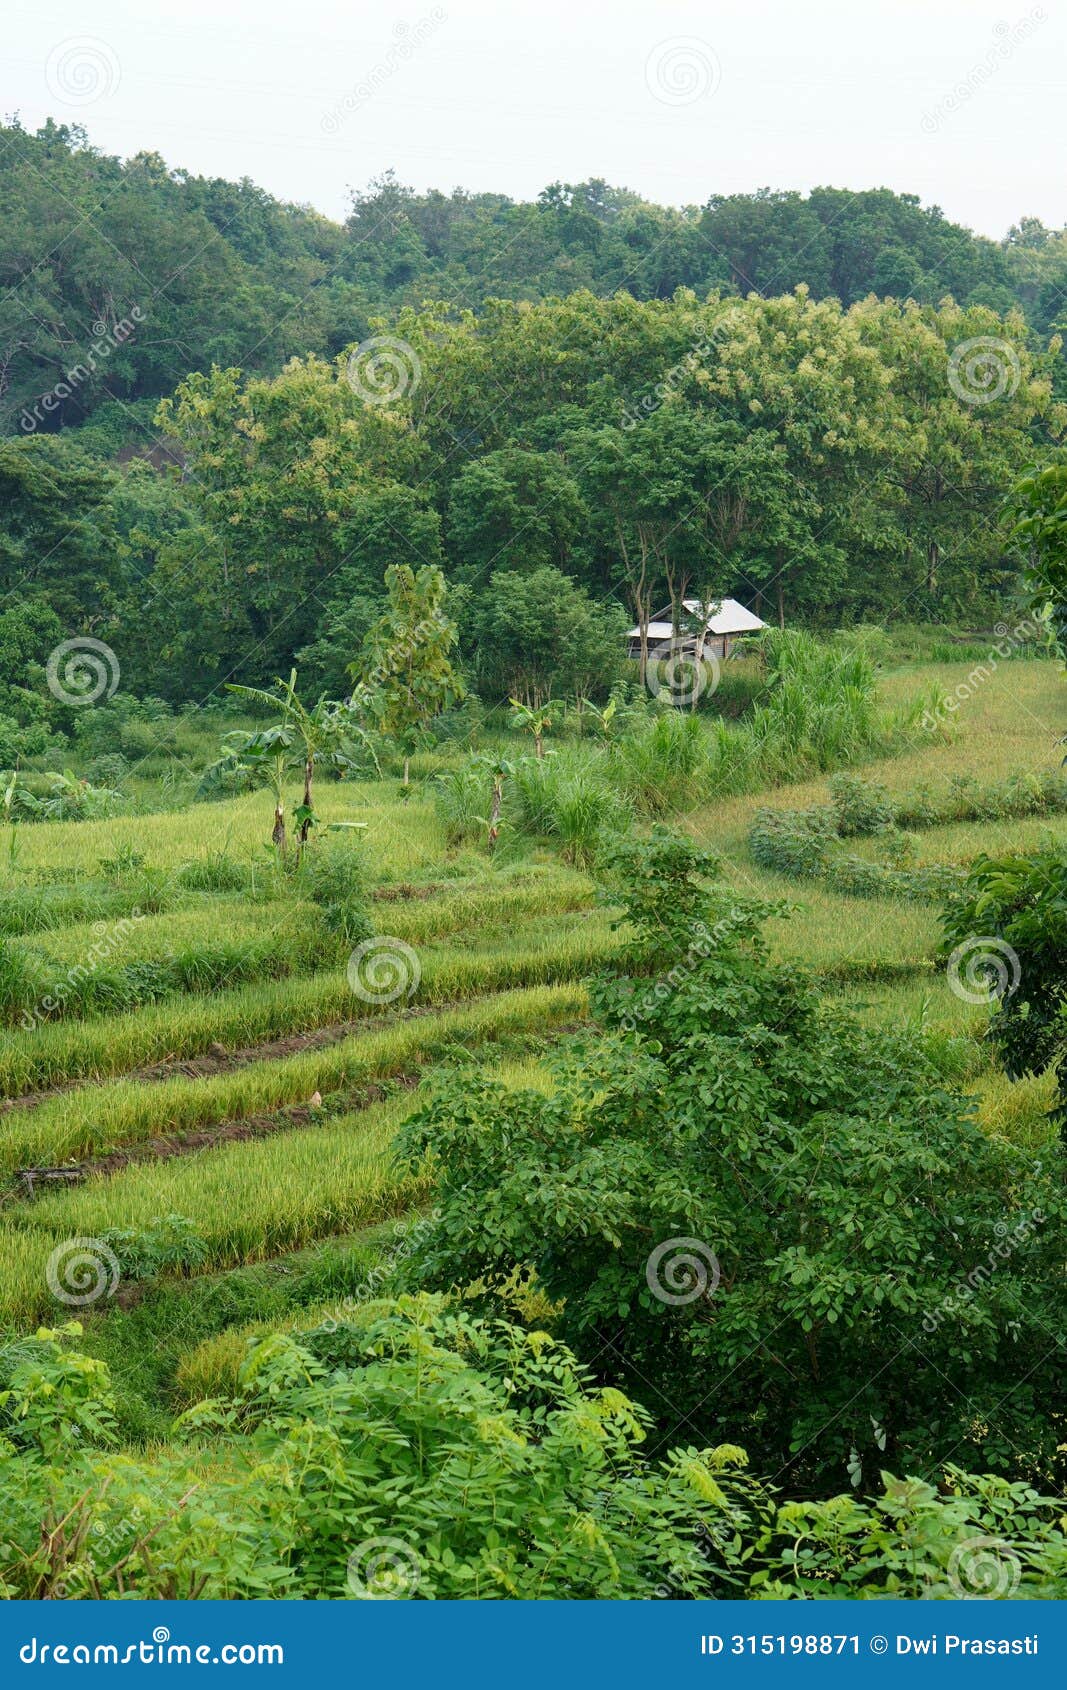 a terraced rice field with one house amidst lush hillsides, creating a picturesque rural landscape.